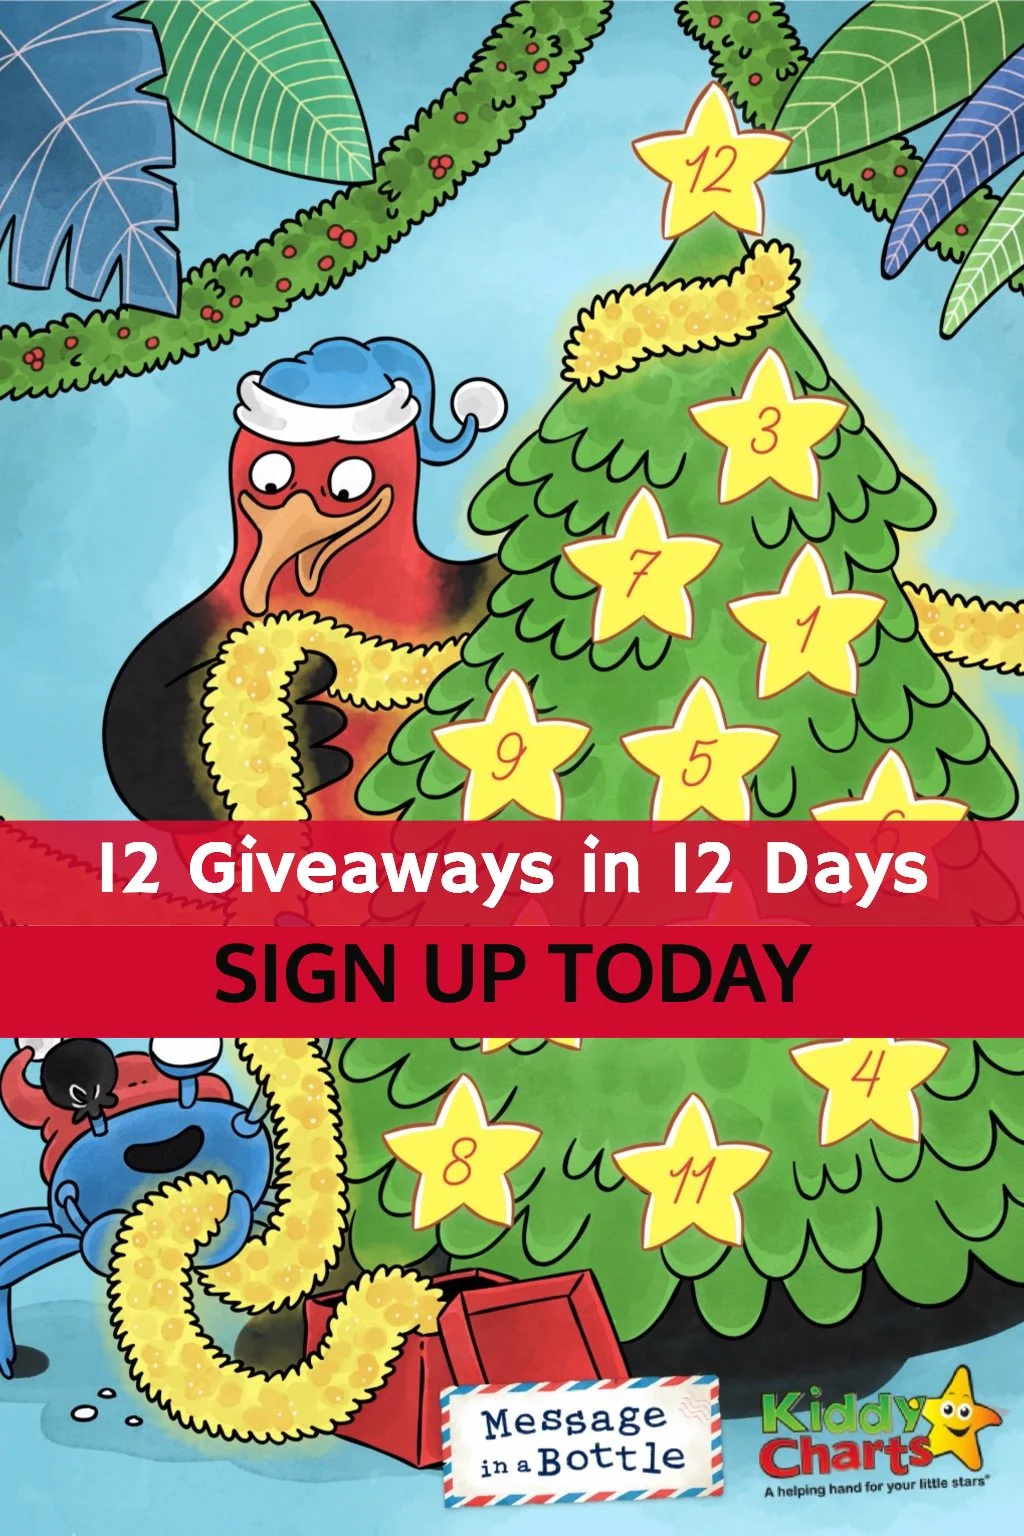 We have 12 christmas competitions from 1st December - sign up today for a chance to get Christmas sorted for the kids! #giveaways #christmas #adventcalendars